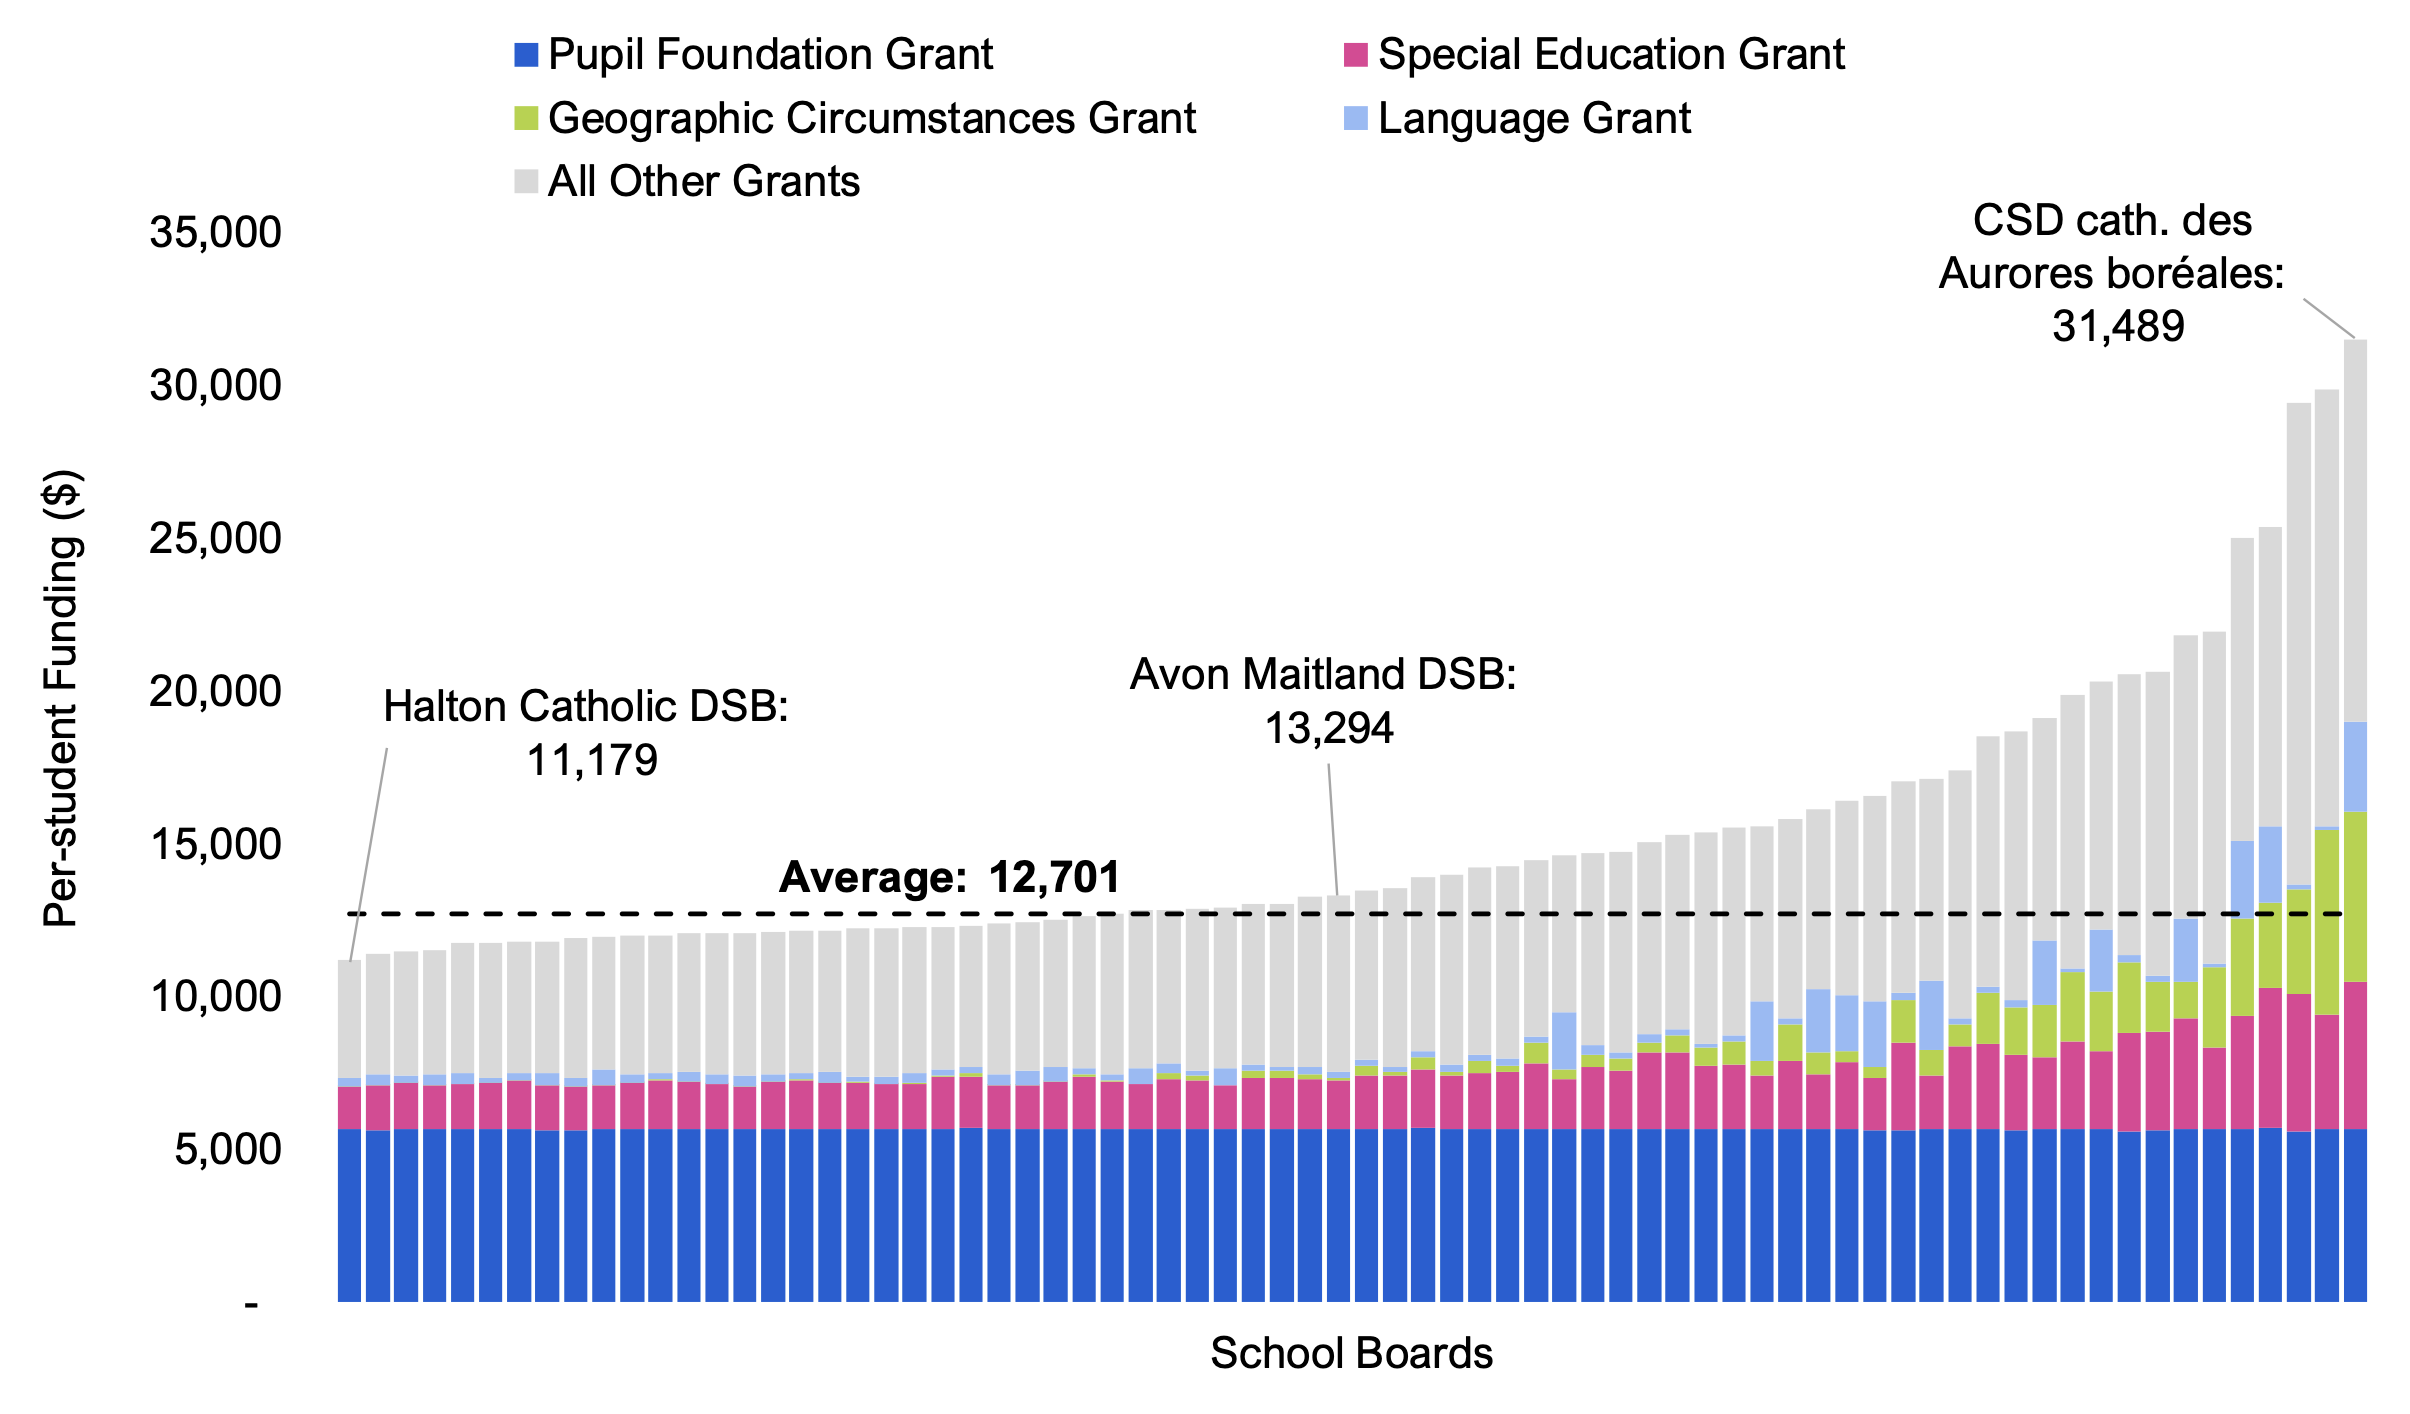 Figure 4.3 shows per-student GSN funding by school board. The values range from a low of $11,179 for the Halton Catholic DSB to a high of $31,489 for the CSD catholique des Aurores boréales, with an overall average of $12,701.